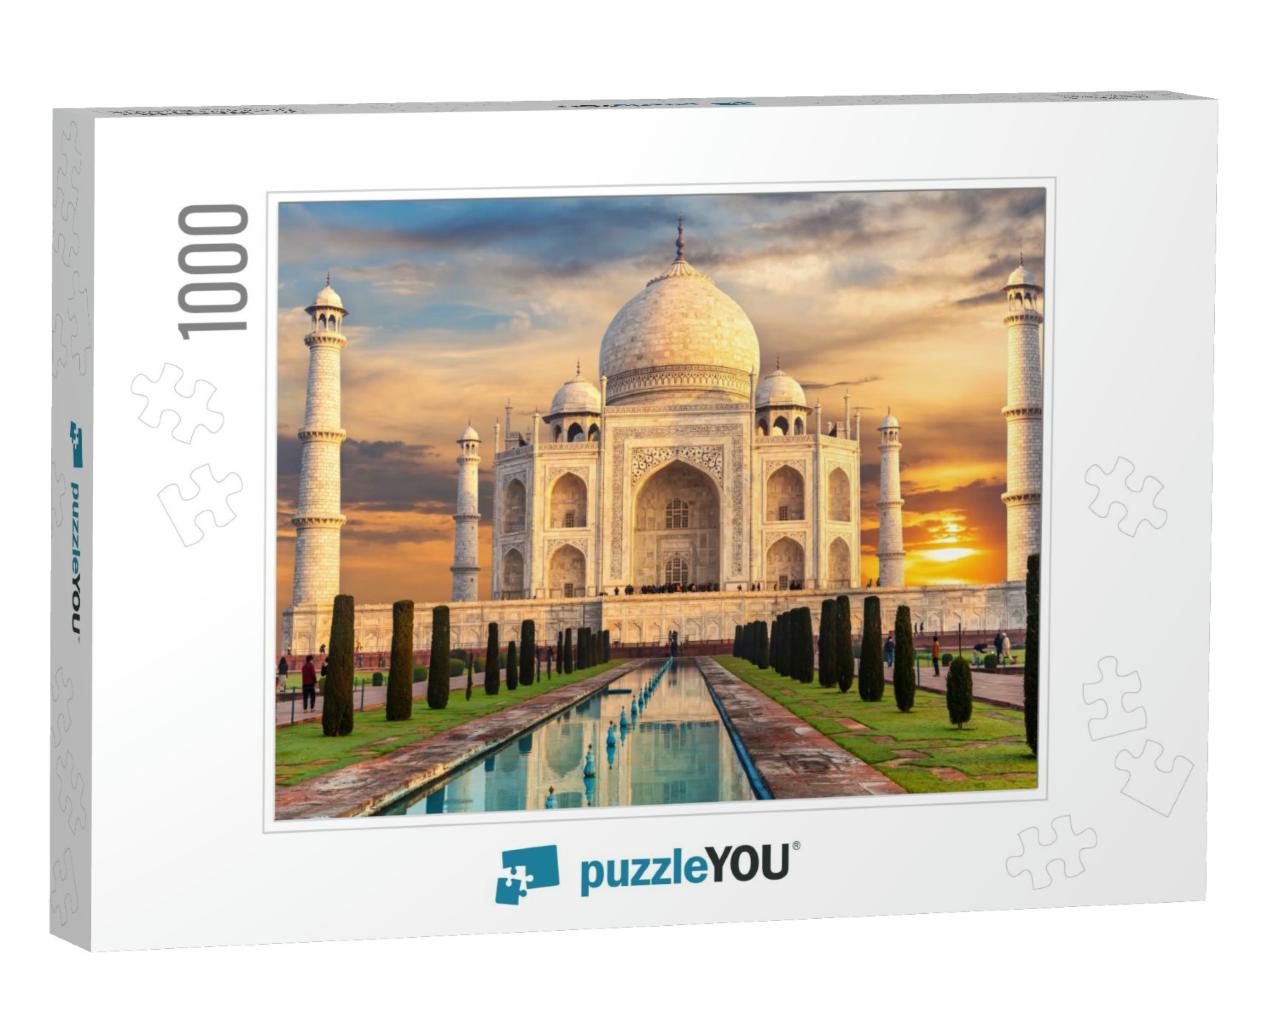 Taj Mahal At Sunset, Famous Place of Visit, India, Agra... Jigsaw Puzzle with 1000 pieces